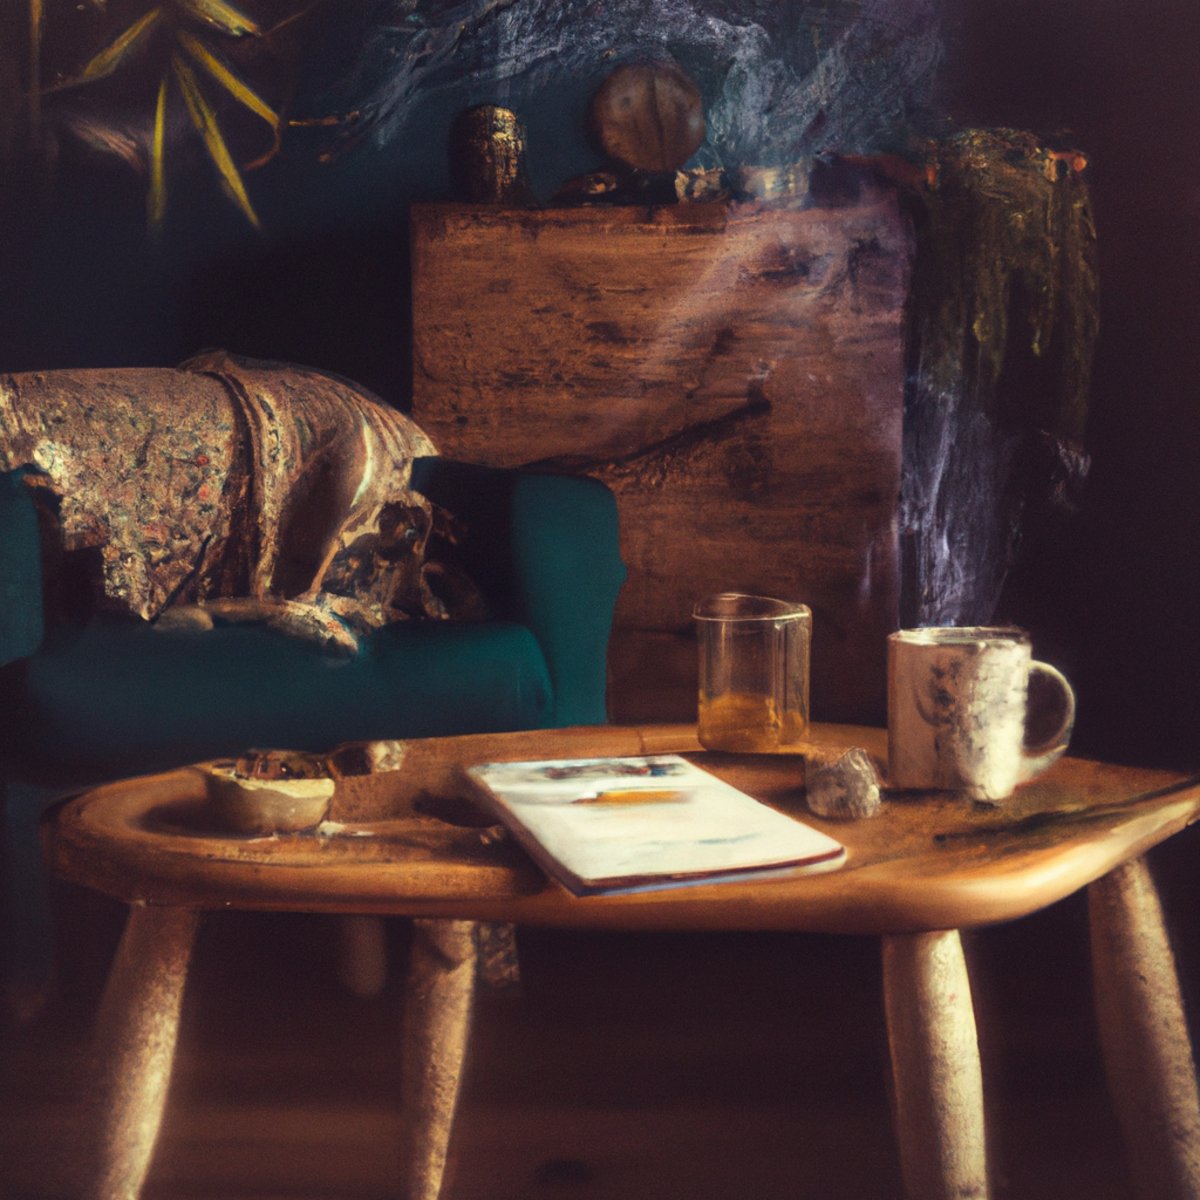 Cozy living room with warm lighting, herbal tea, journal, blanket, flowers. Invites relaxation and stress relief - Self-care during Stressful Times